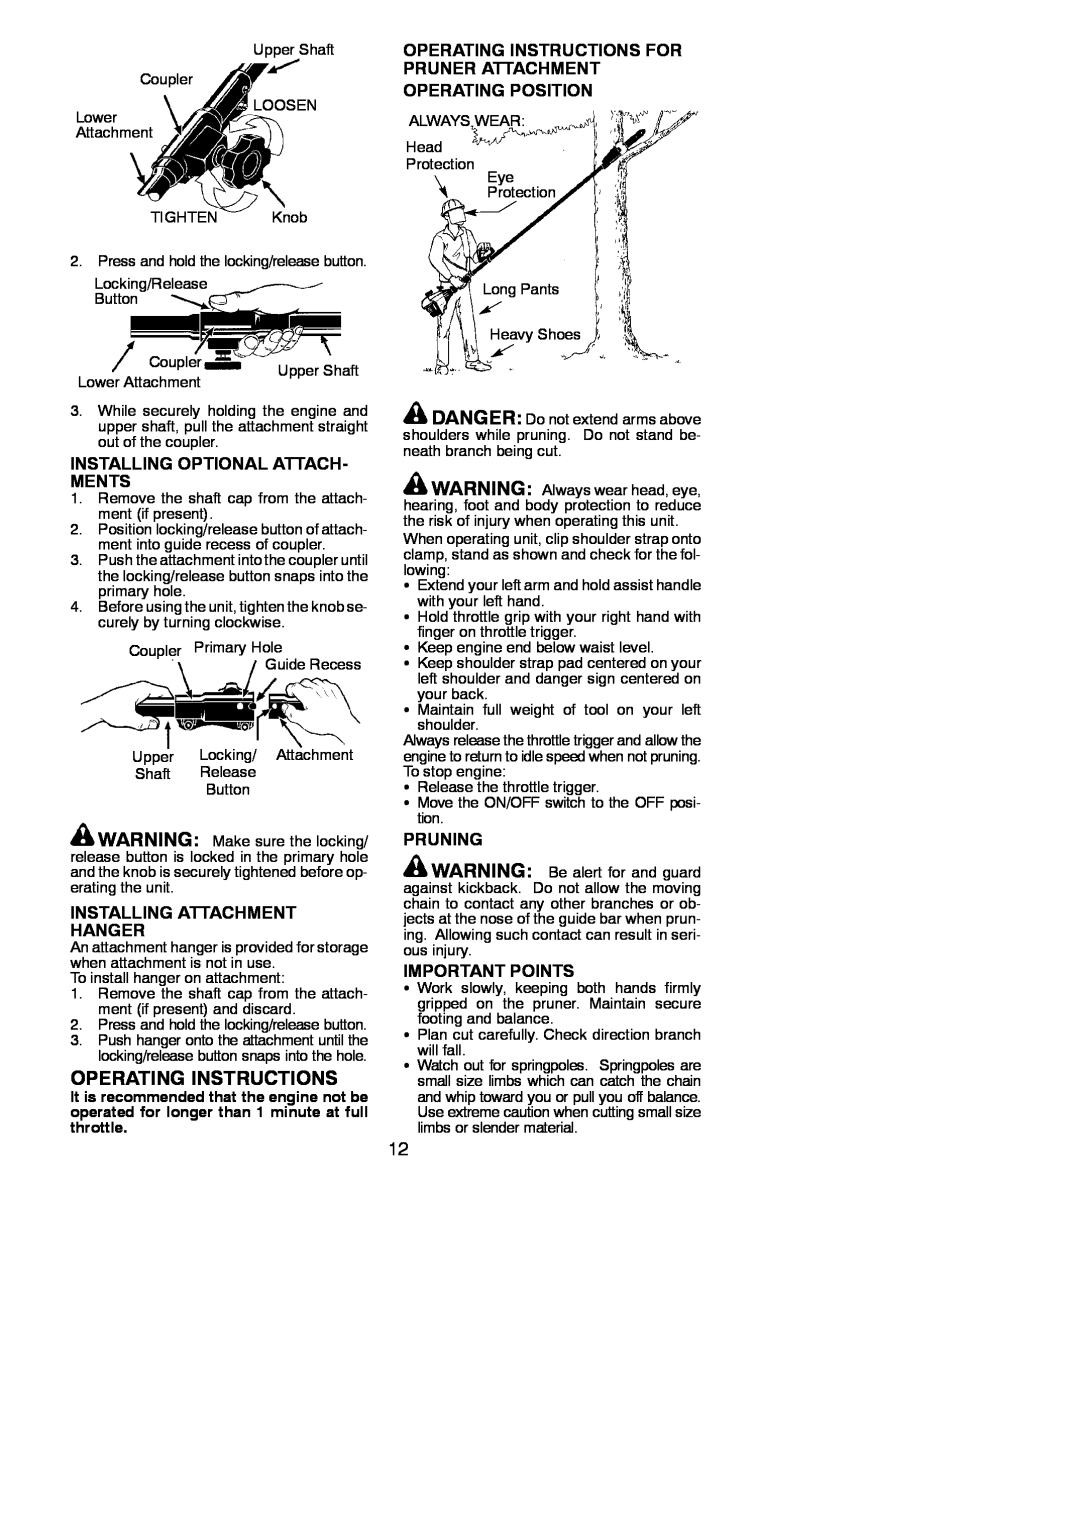 Poulan 530165221 Operating Instructions For Pruner Attachment Operating Position, Installing Optional Attach- Ments 